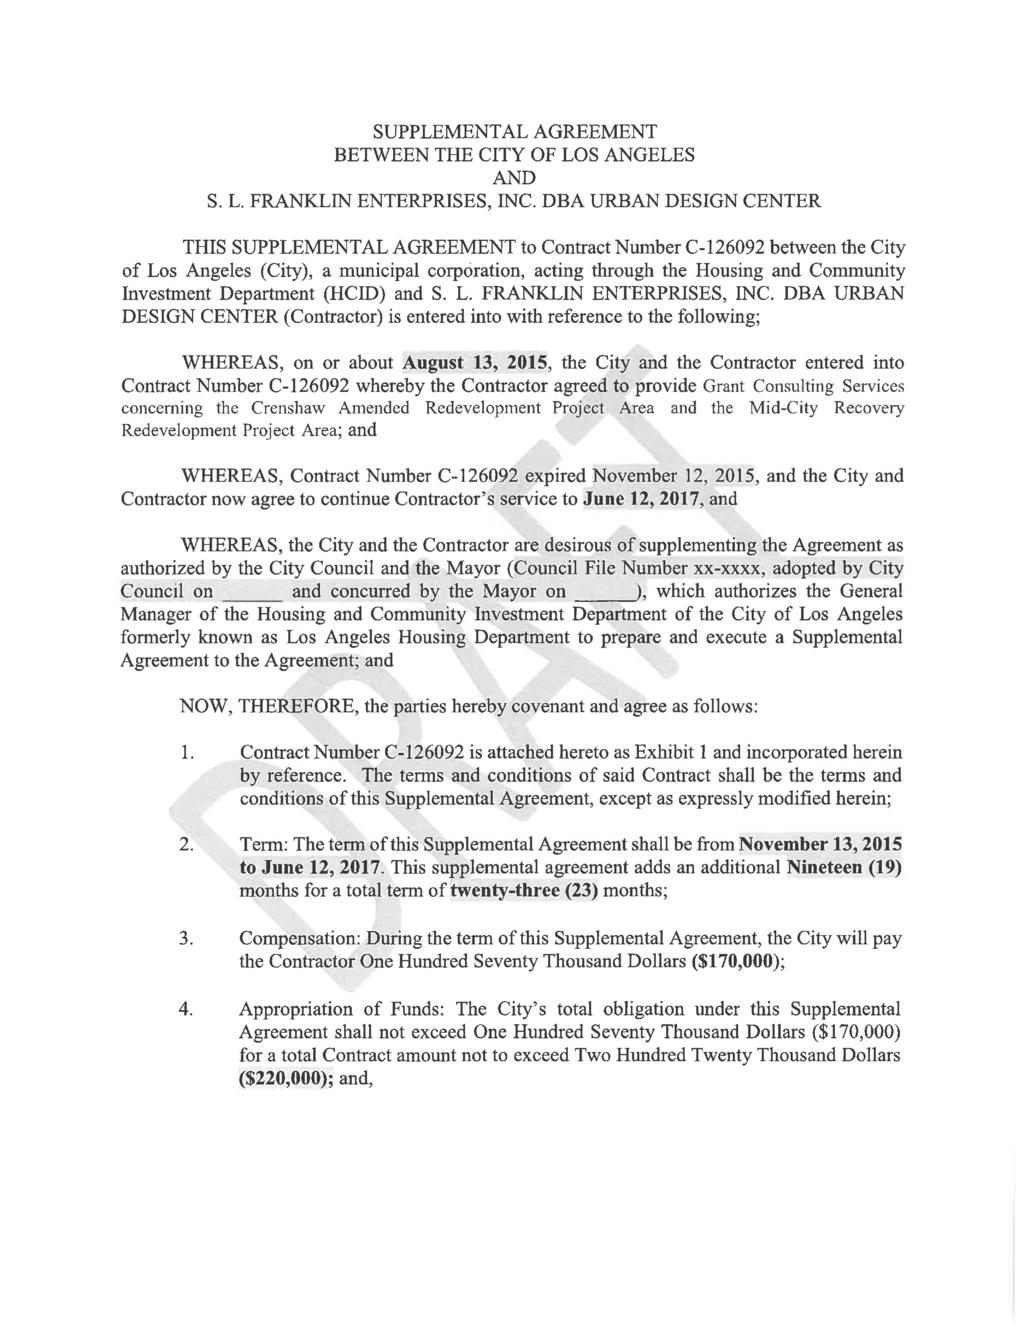 SUPPLEMENTAL AGREEMENT BETWEEN THE CITY OF LOS ANGELES AND S. L. FRANKLIN ENTERPRISES, INC.